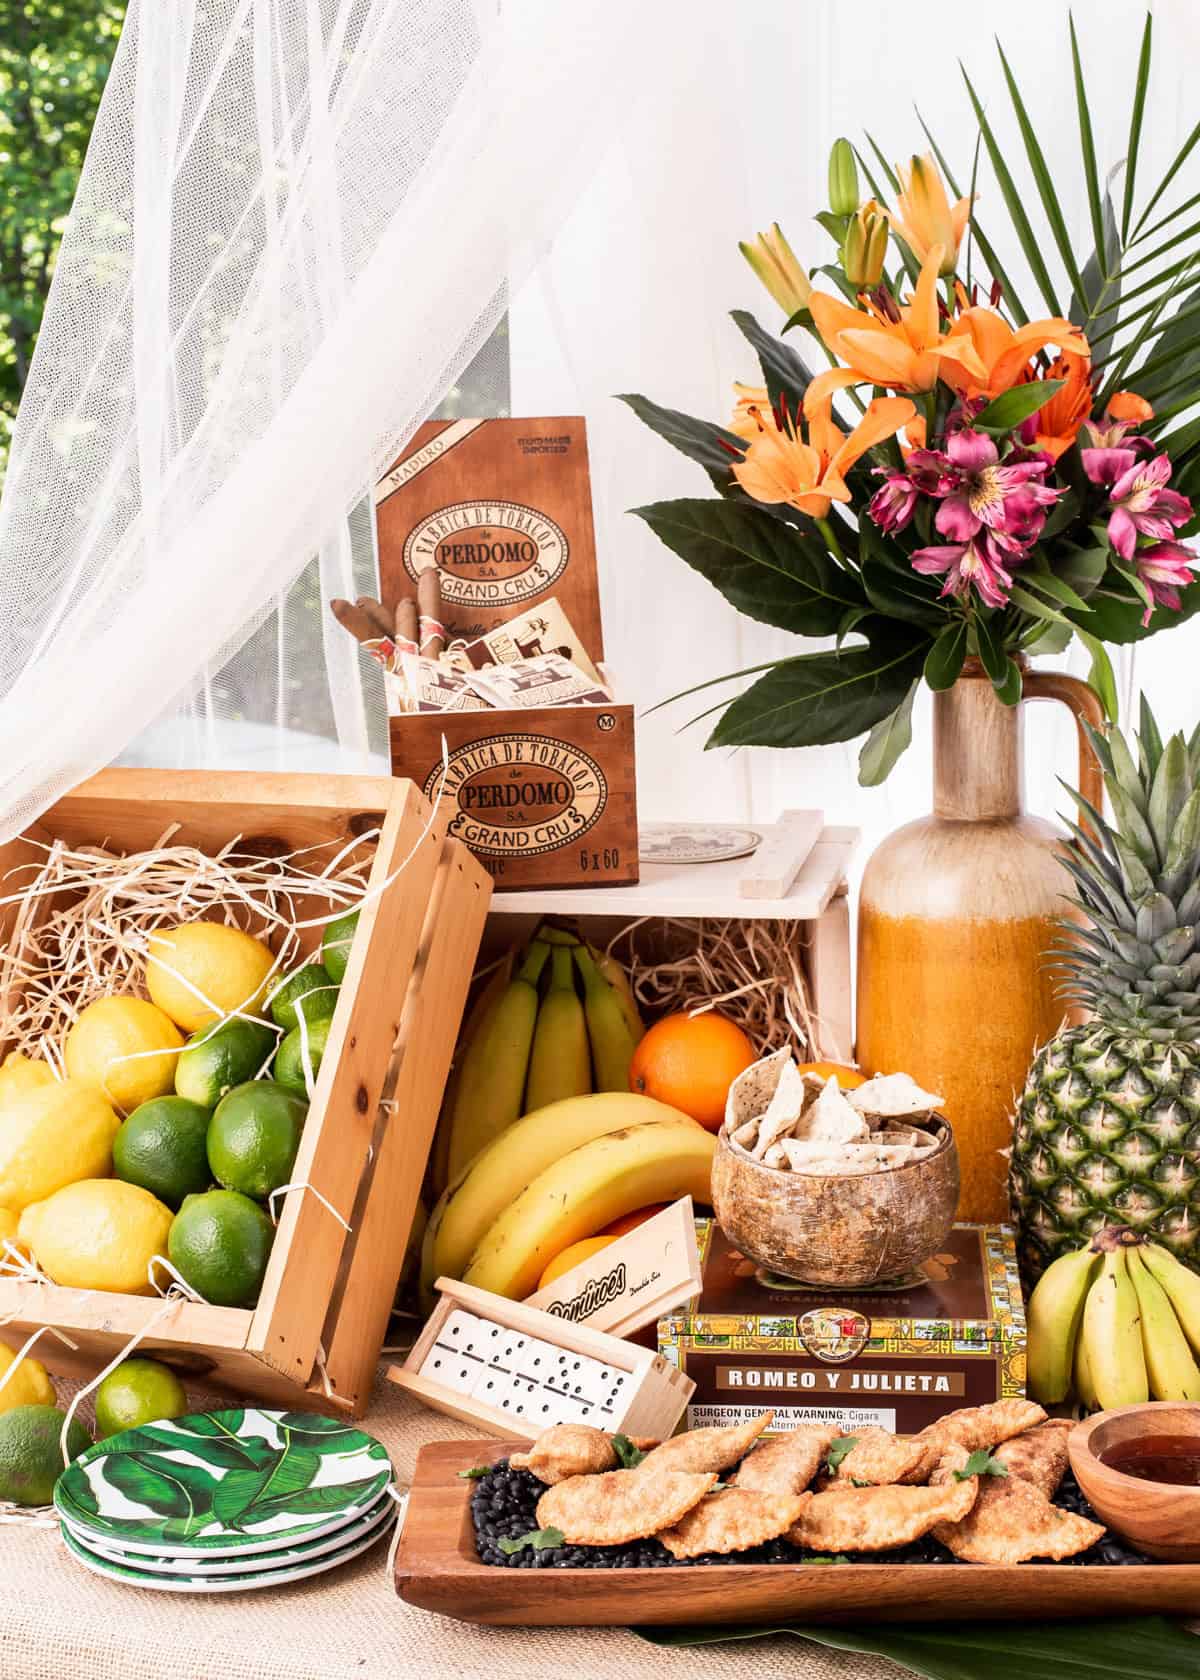 tropical themed party decorations set up outside, with wood crates, fruit and tropical flowers.